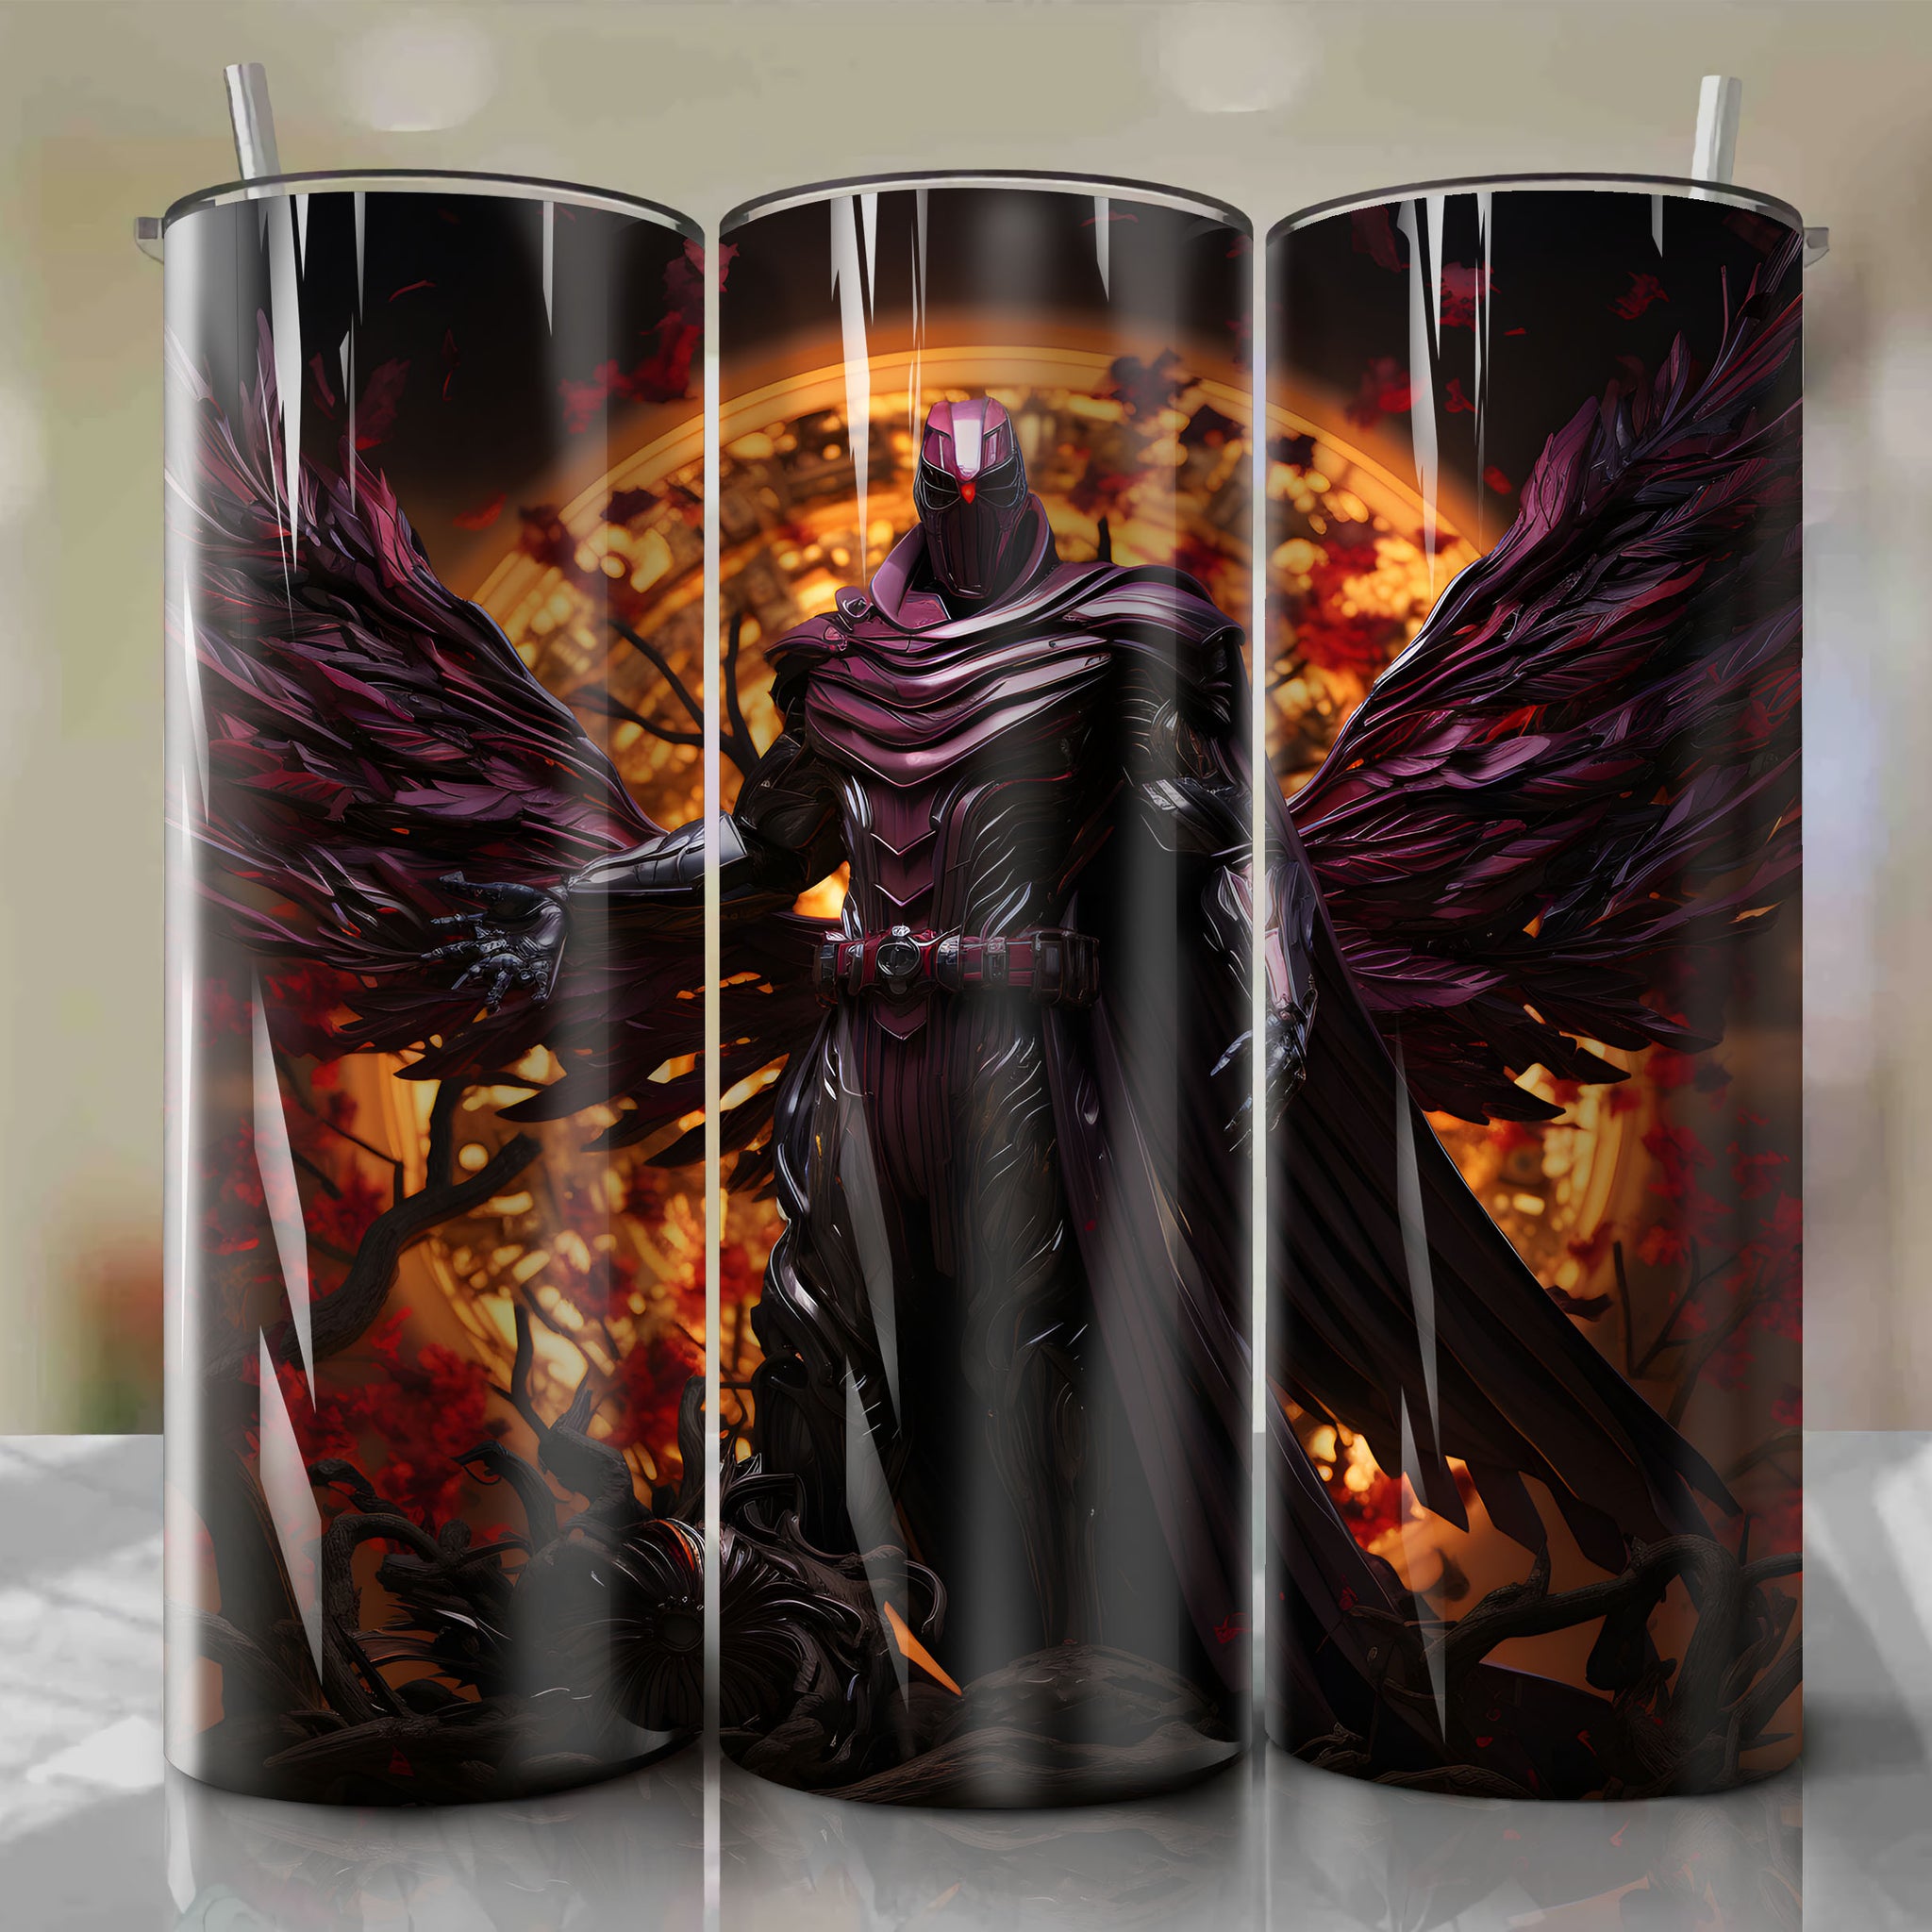 20 Oz Tumbler Wrap - Elevated Design Inspired by Magneto and Metal Sculpture
